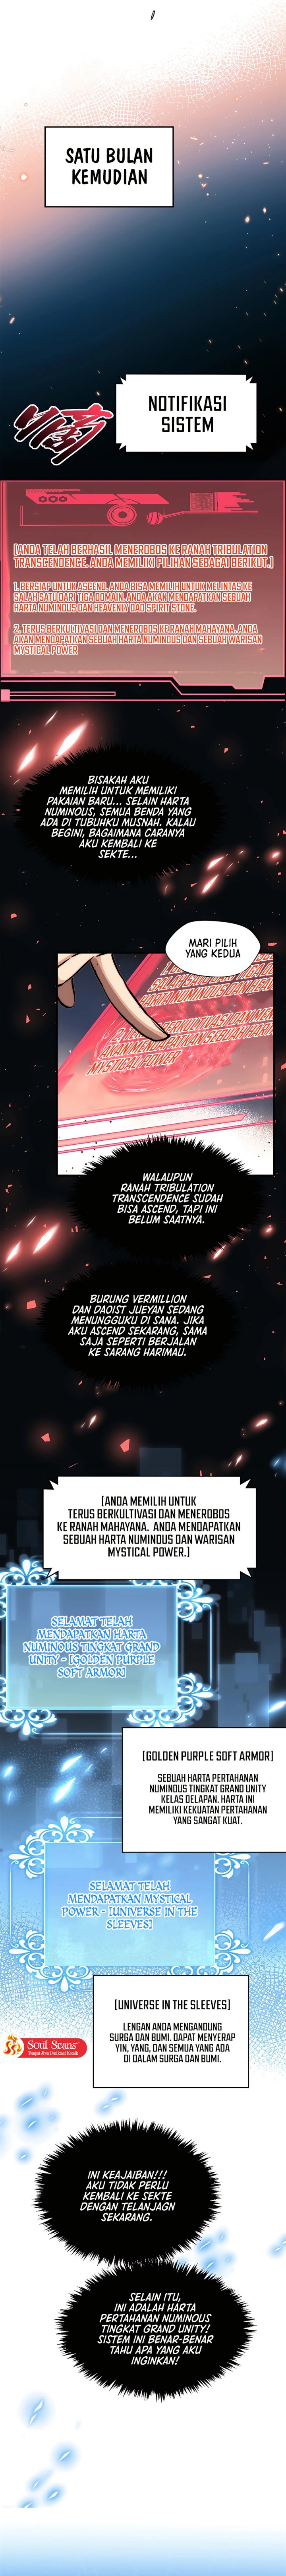 Dilarang COPAS - situs resmi www.mangacanblog.com - Komik top tier providence secretly cultivate for a thousand years 116 - chapter 116 117 Indonesia top tier providence secretly cultivate for a thousand years 116 - chapter 116 Terbaru 13|Baca Manga Komik Indonesia|Mangacan